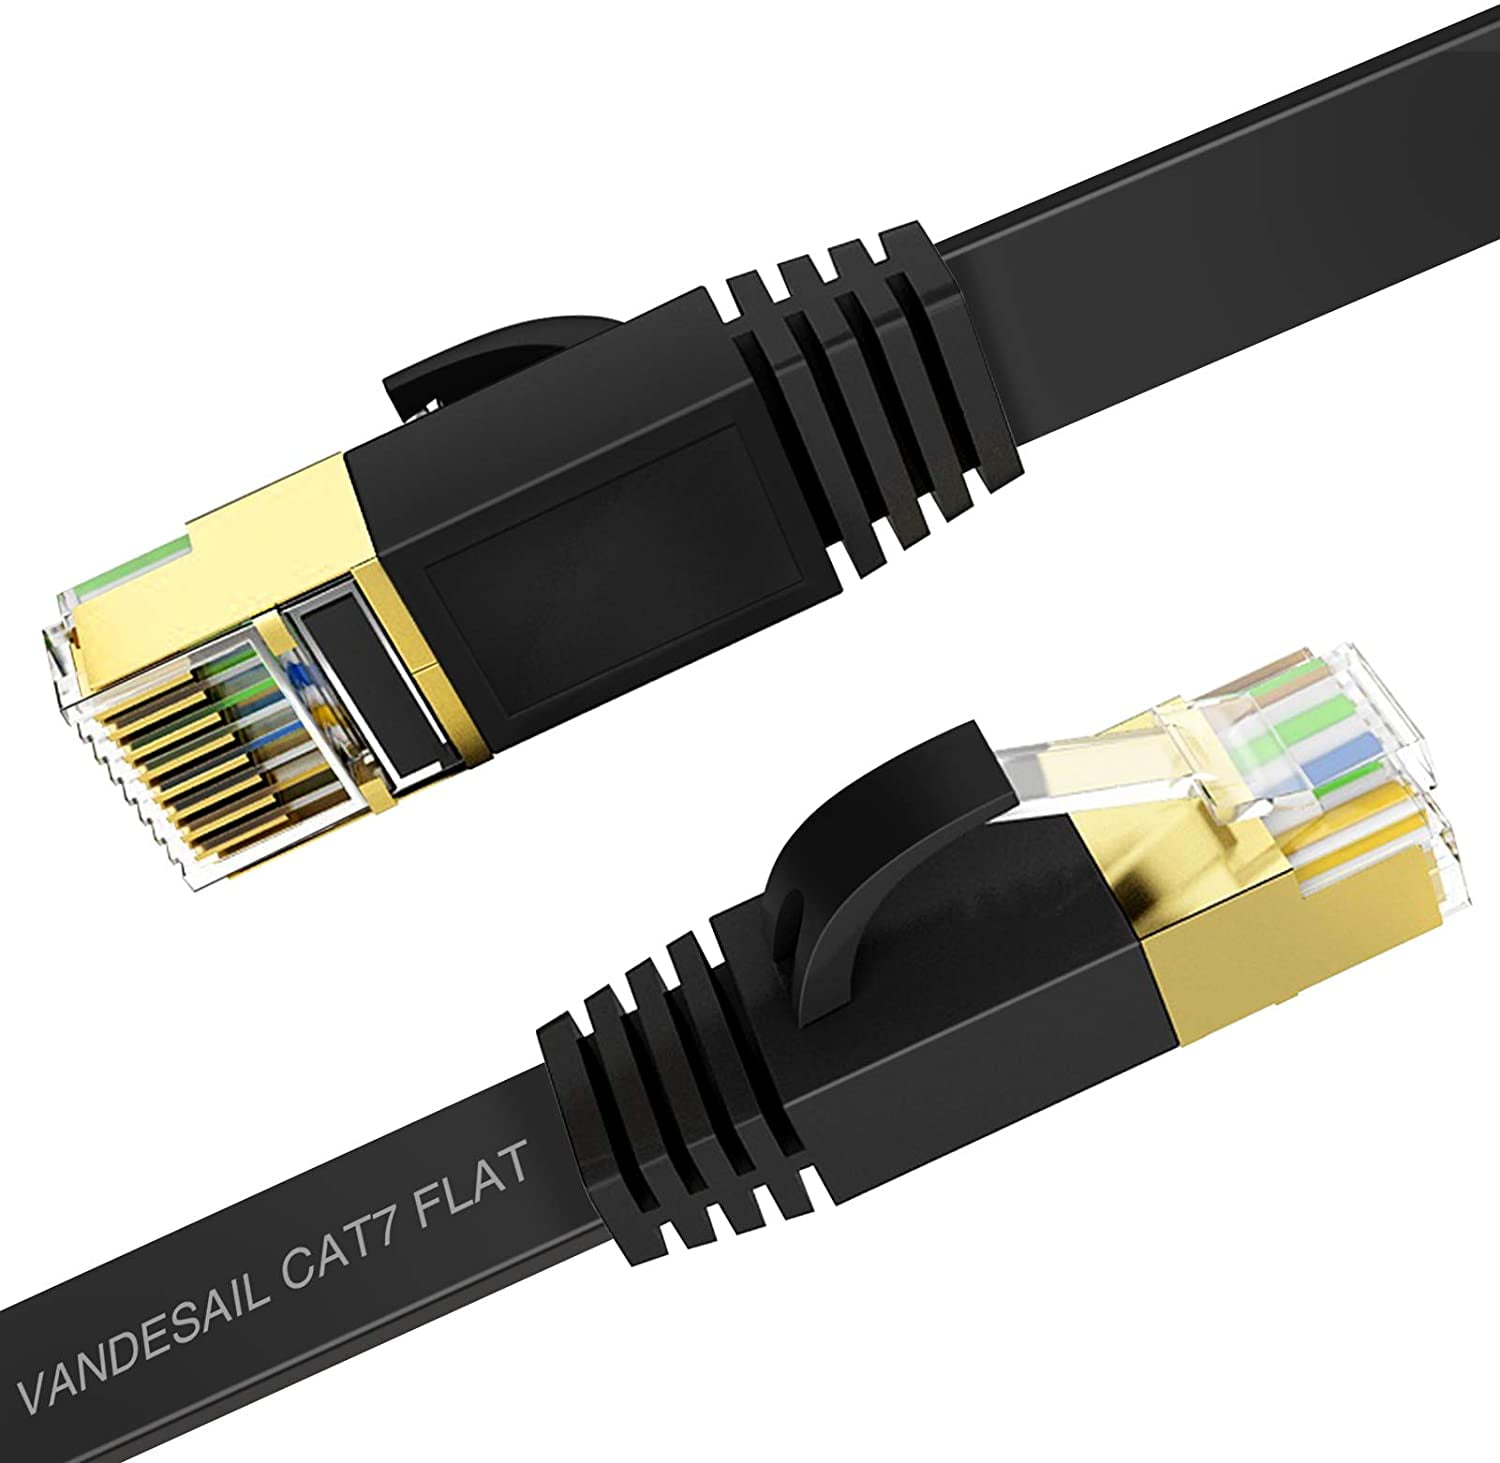 Cat8 Ethernet Cable 100FT High Speed Outdoor&Indoor Cat8 LAN Network Cable 40Gbps 2000Mhz with Gold Plated RJ45 Connector 30M Weatherproof S/FTP UV Resistant for Router/Gaming/Modem 